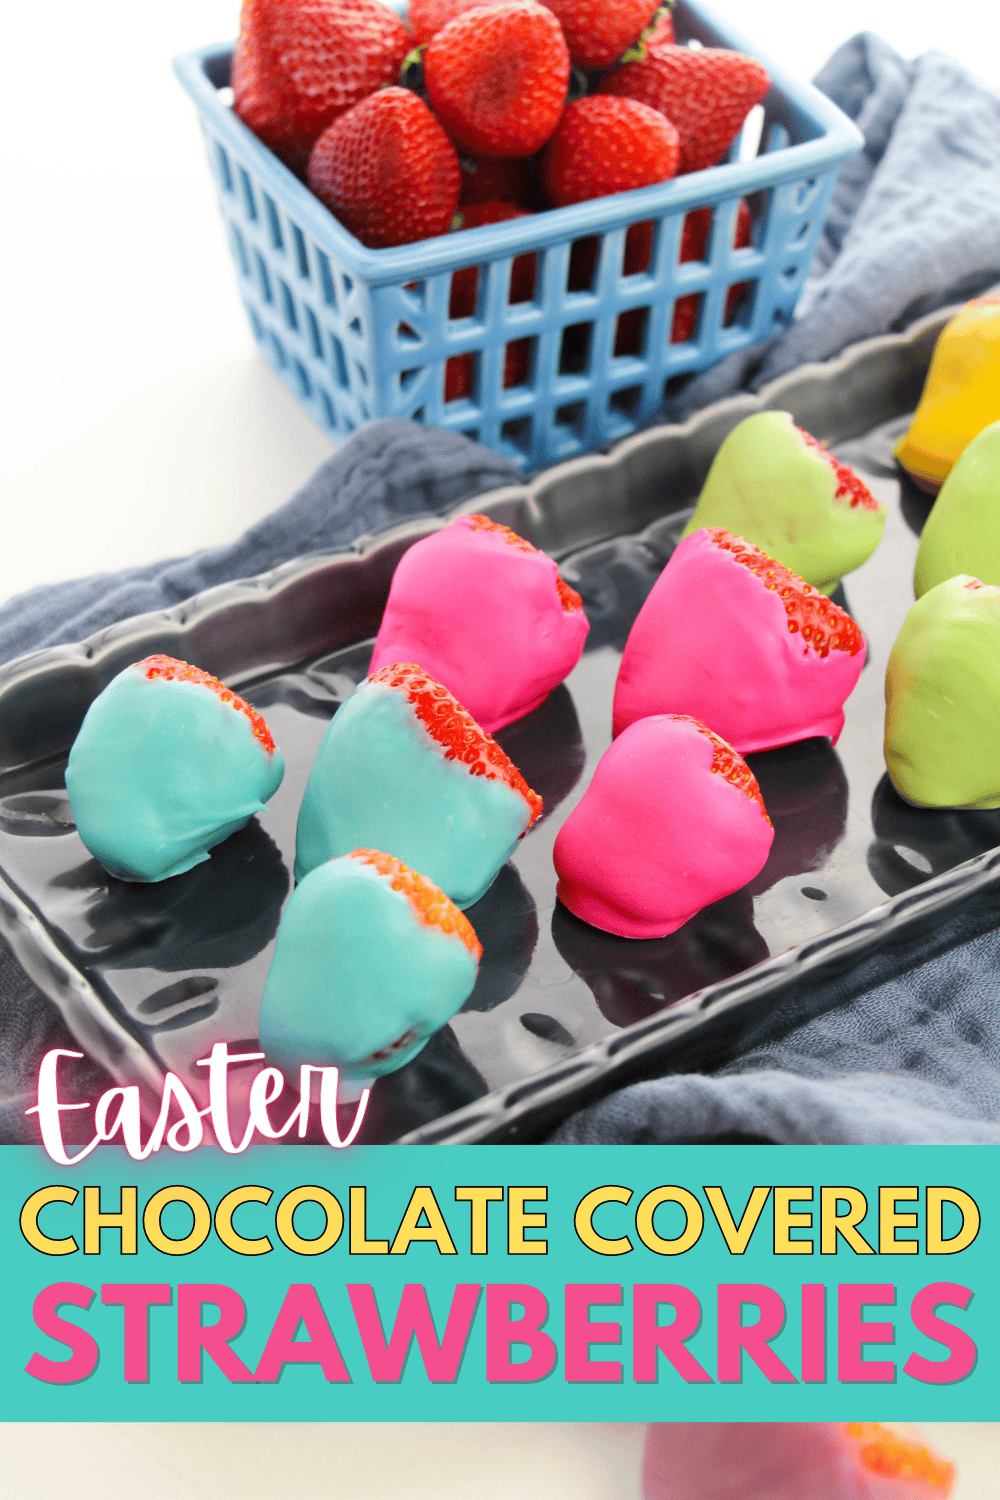 These Easter Chocolate Covered Strawberries make a wonderful treat for any occasion. They are delicious and fun to make. #easterchocolatecoveredstrawberries #chocolatecoveredstrawberries #easterdessert #easterstrawberries #eastertreat via @wondermomwannab